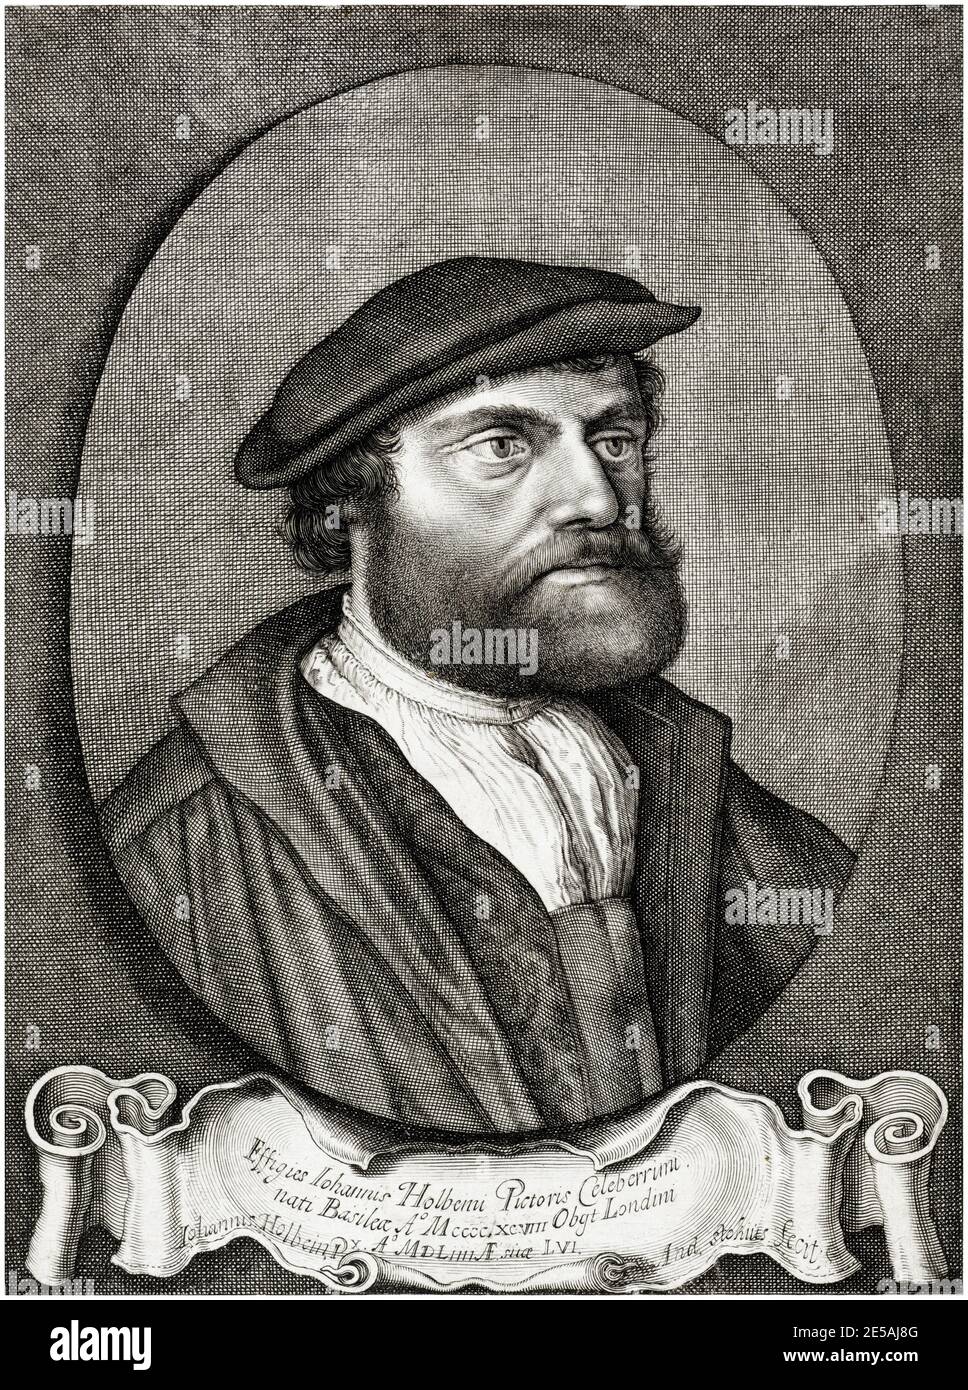 Hans Holbein the Younger (c.1497/98-1543), pittore tedesco, incisione ritratto dell'artista di Andries Jacobsz. Stock, 1614-1648 Foto Stock